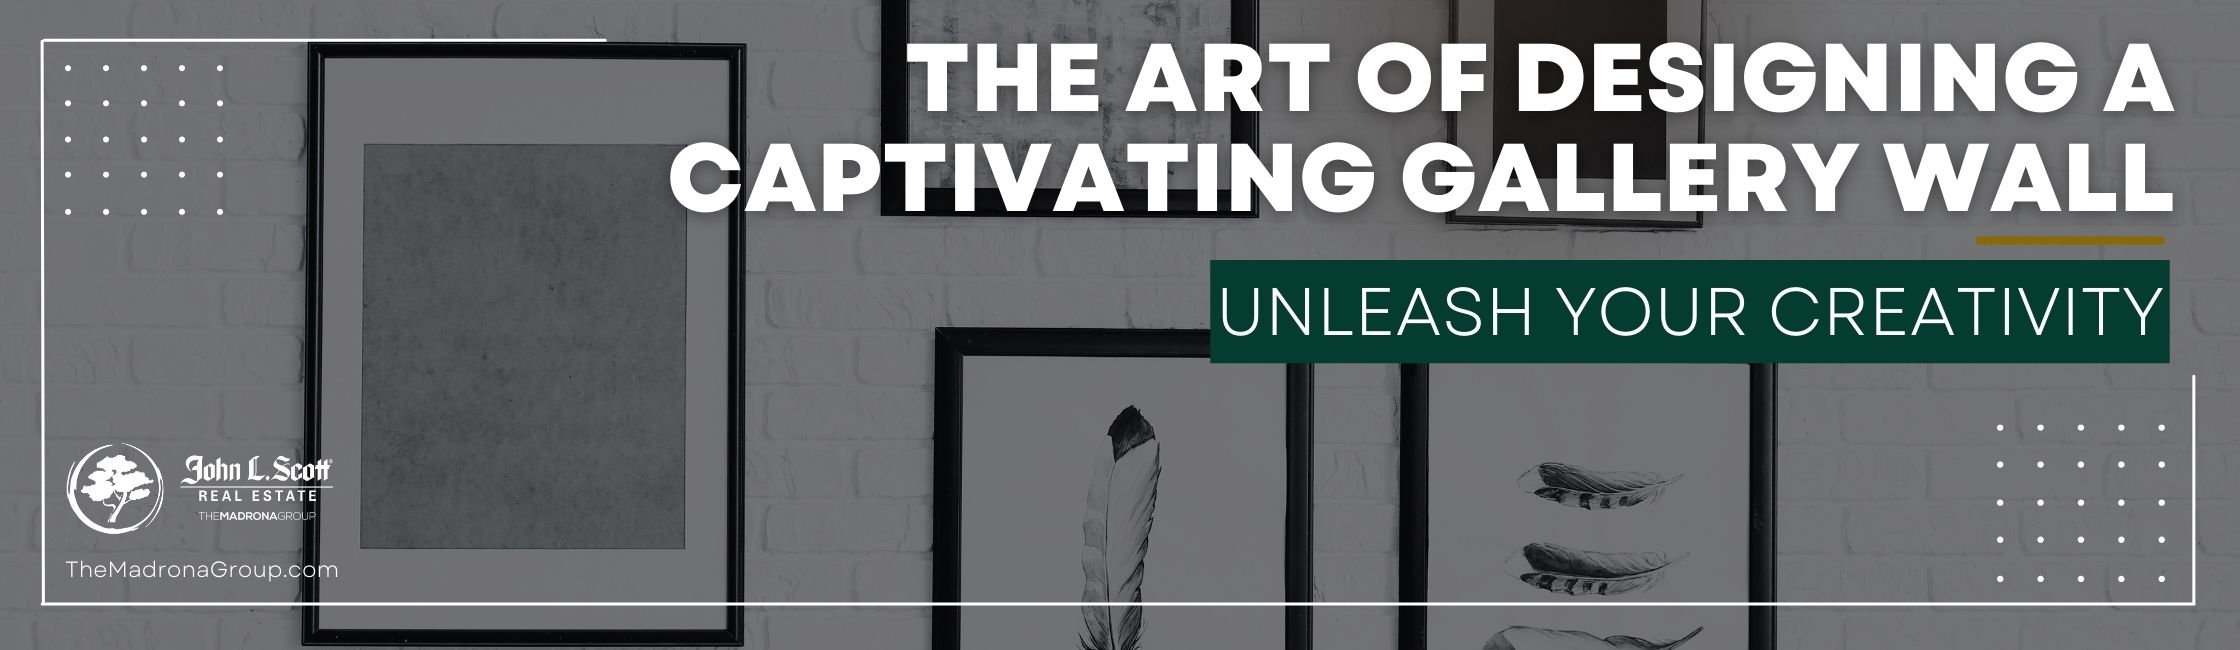 Unleash Your Creativity: The Art of Designing a Gallery Wall